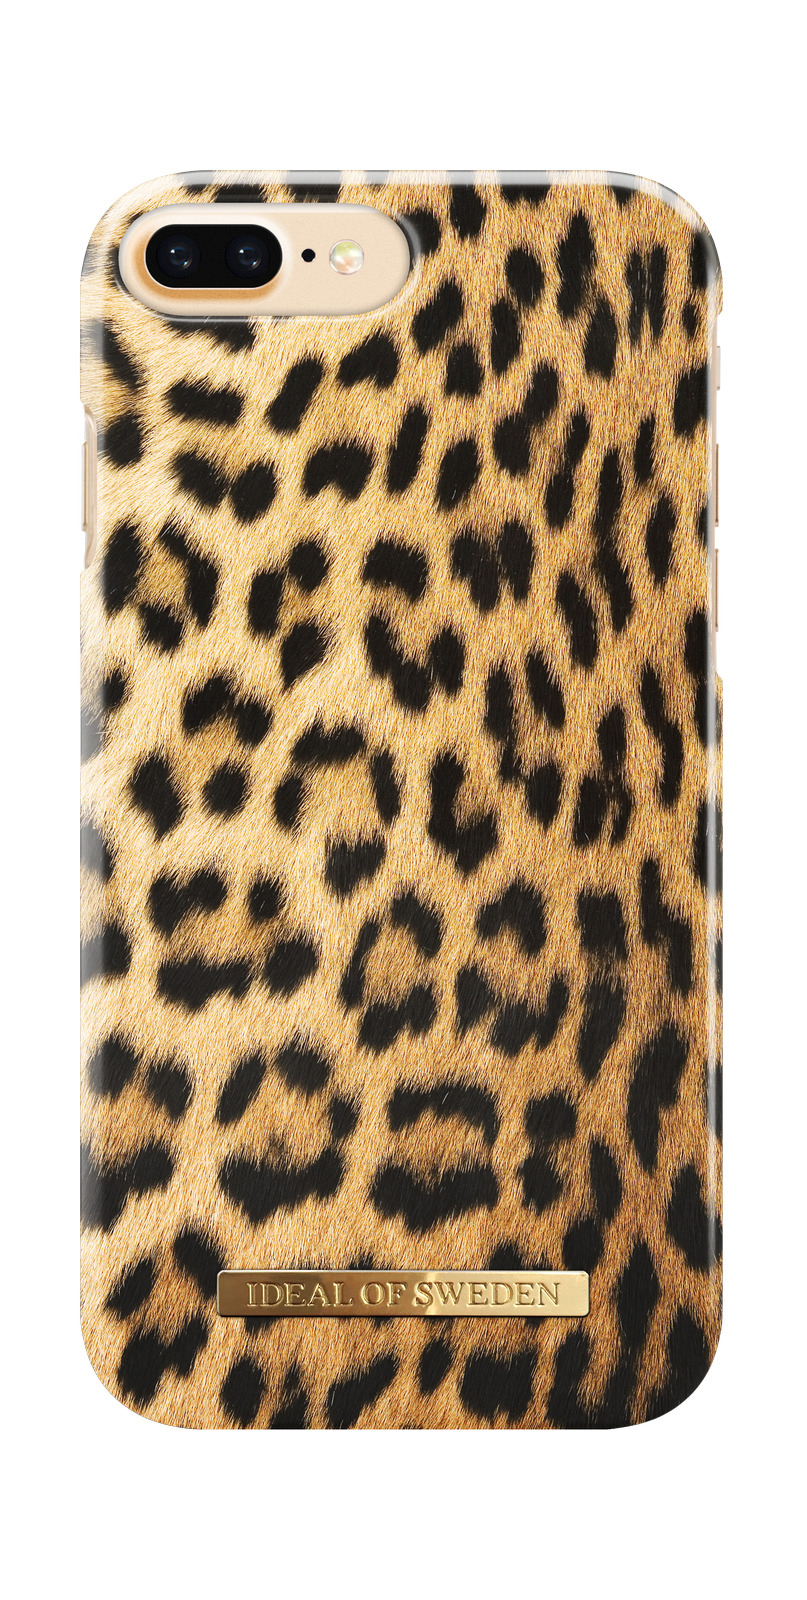 8 Apple, Fashion, Plus, SWEDEN OF Plus, 6 Leopard Plus iPhone 7 iPhone Backcover, ,iPhone Wild IDEAL